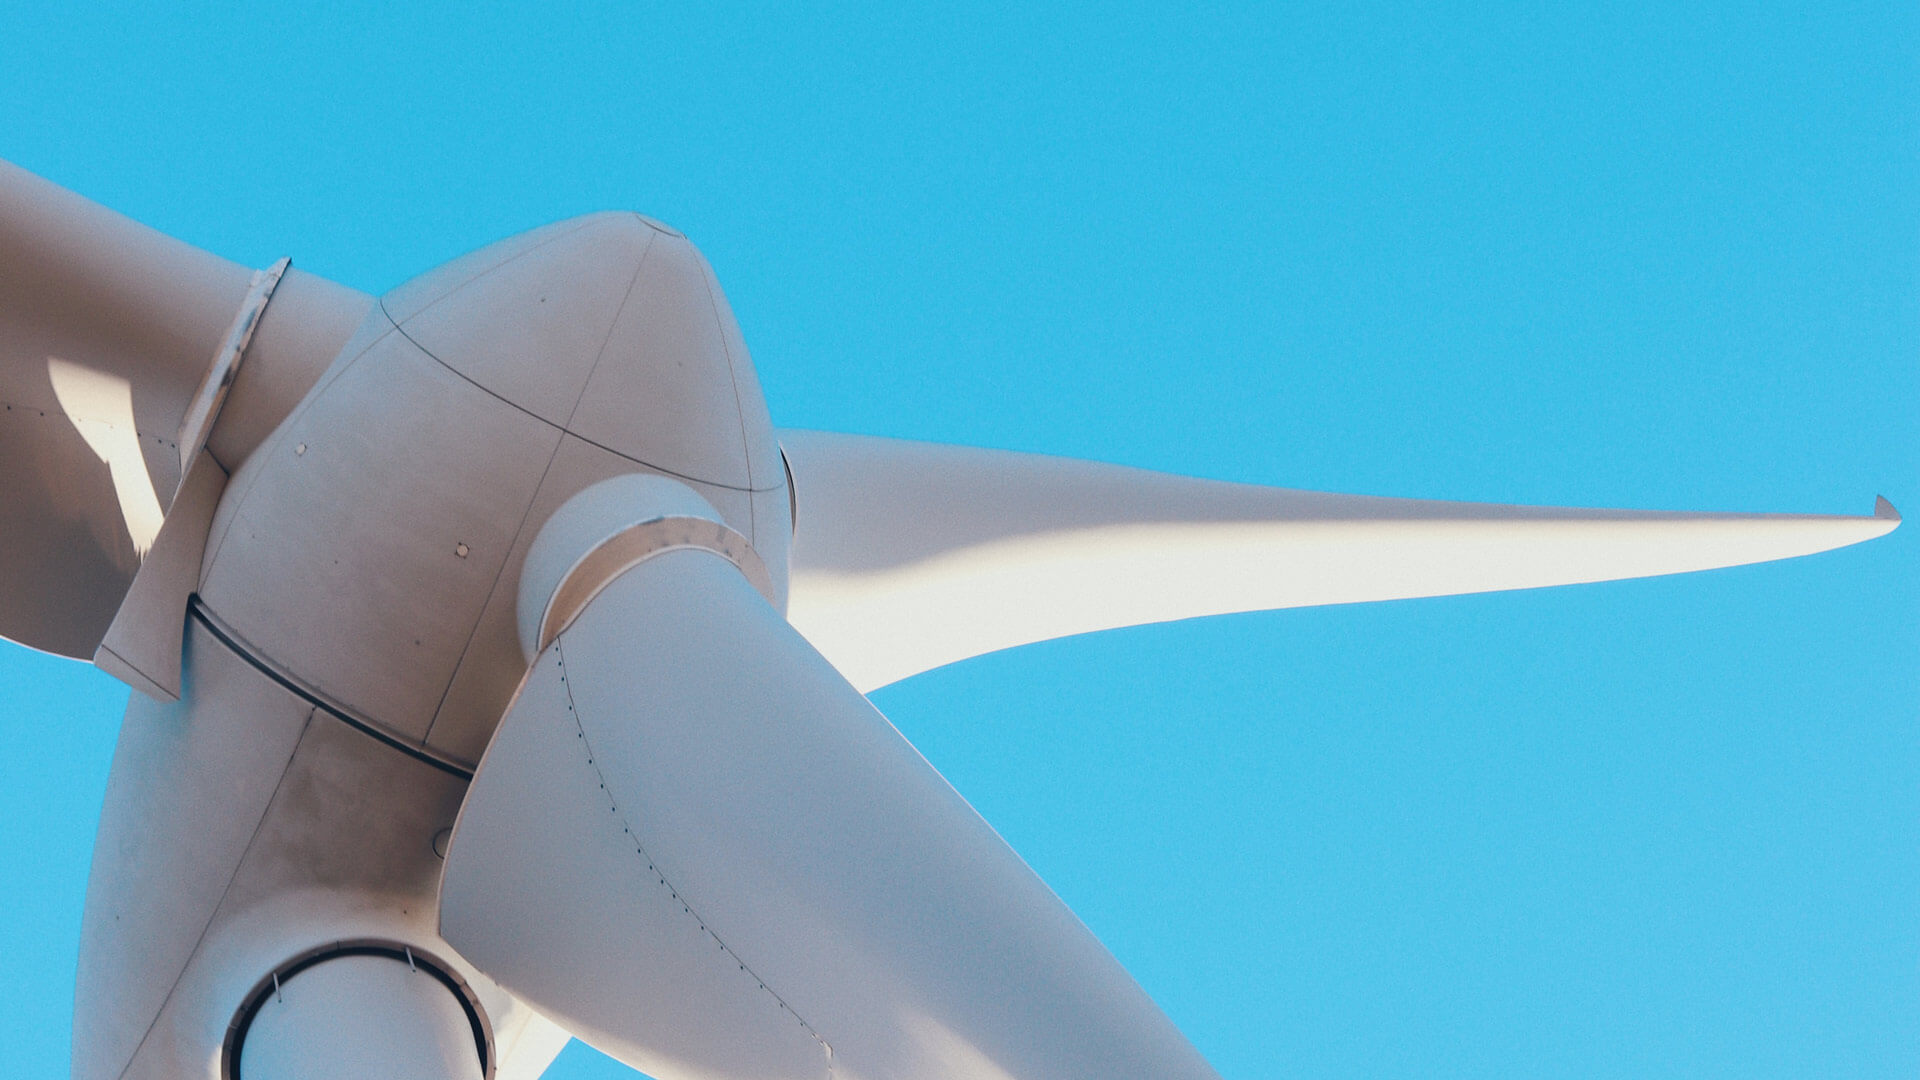 Close-up image of white wind turbine blades against a blue sky.